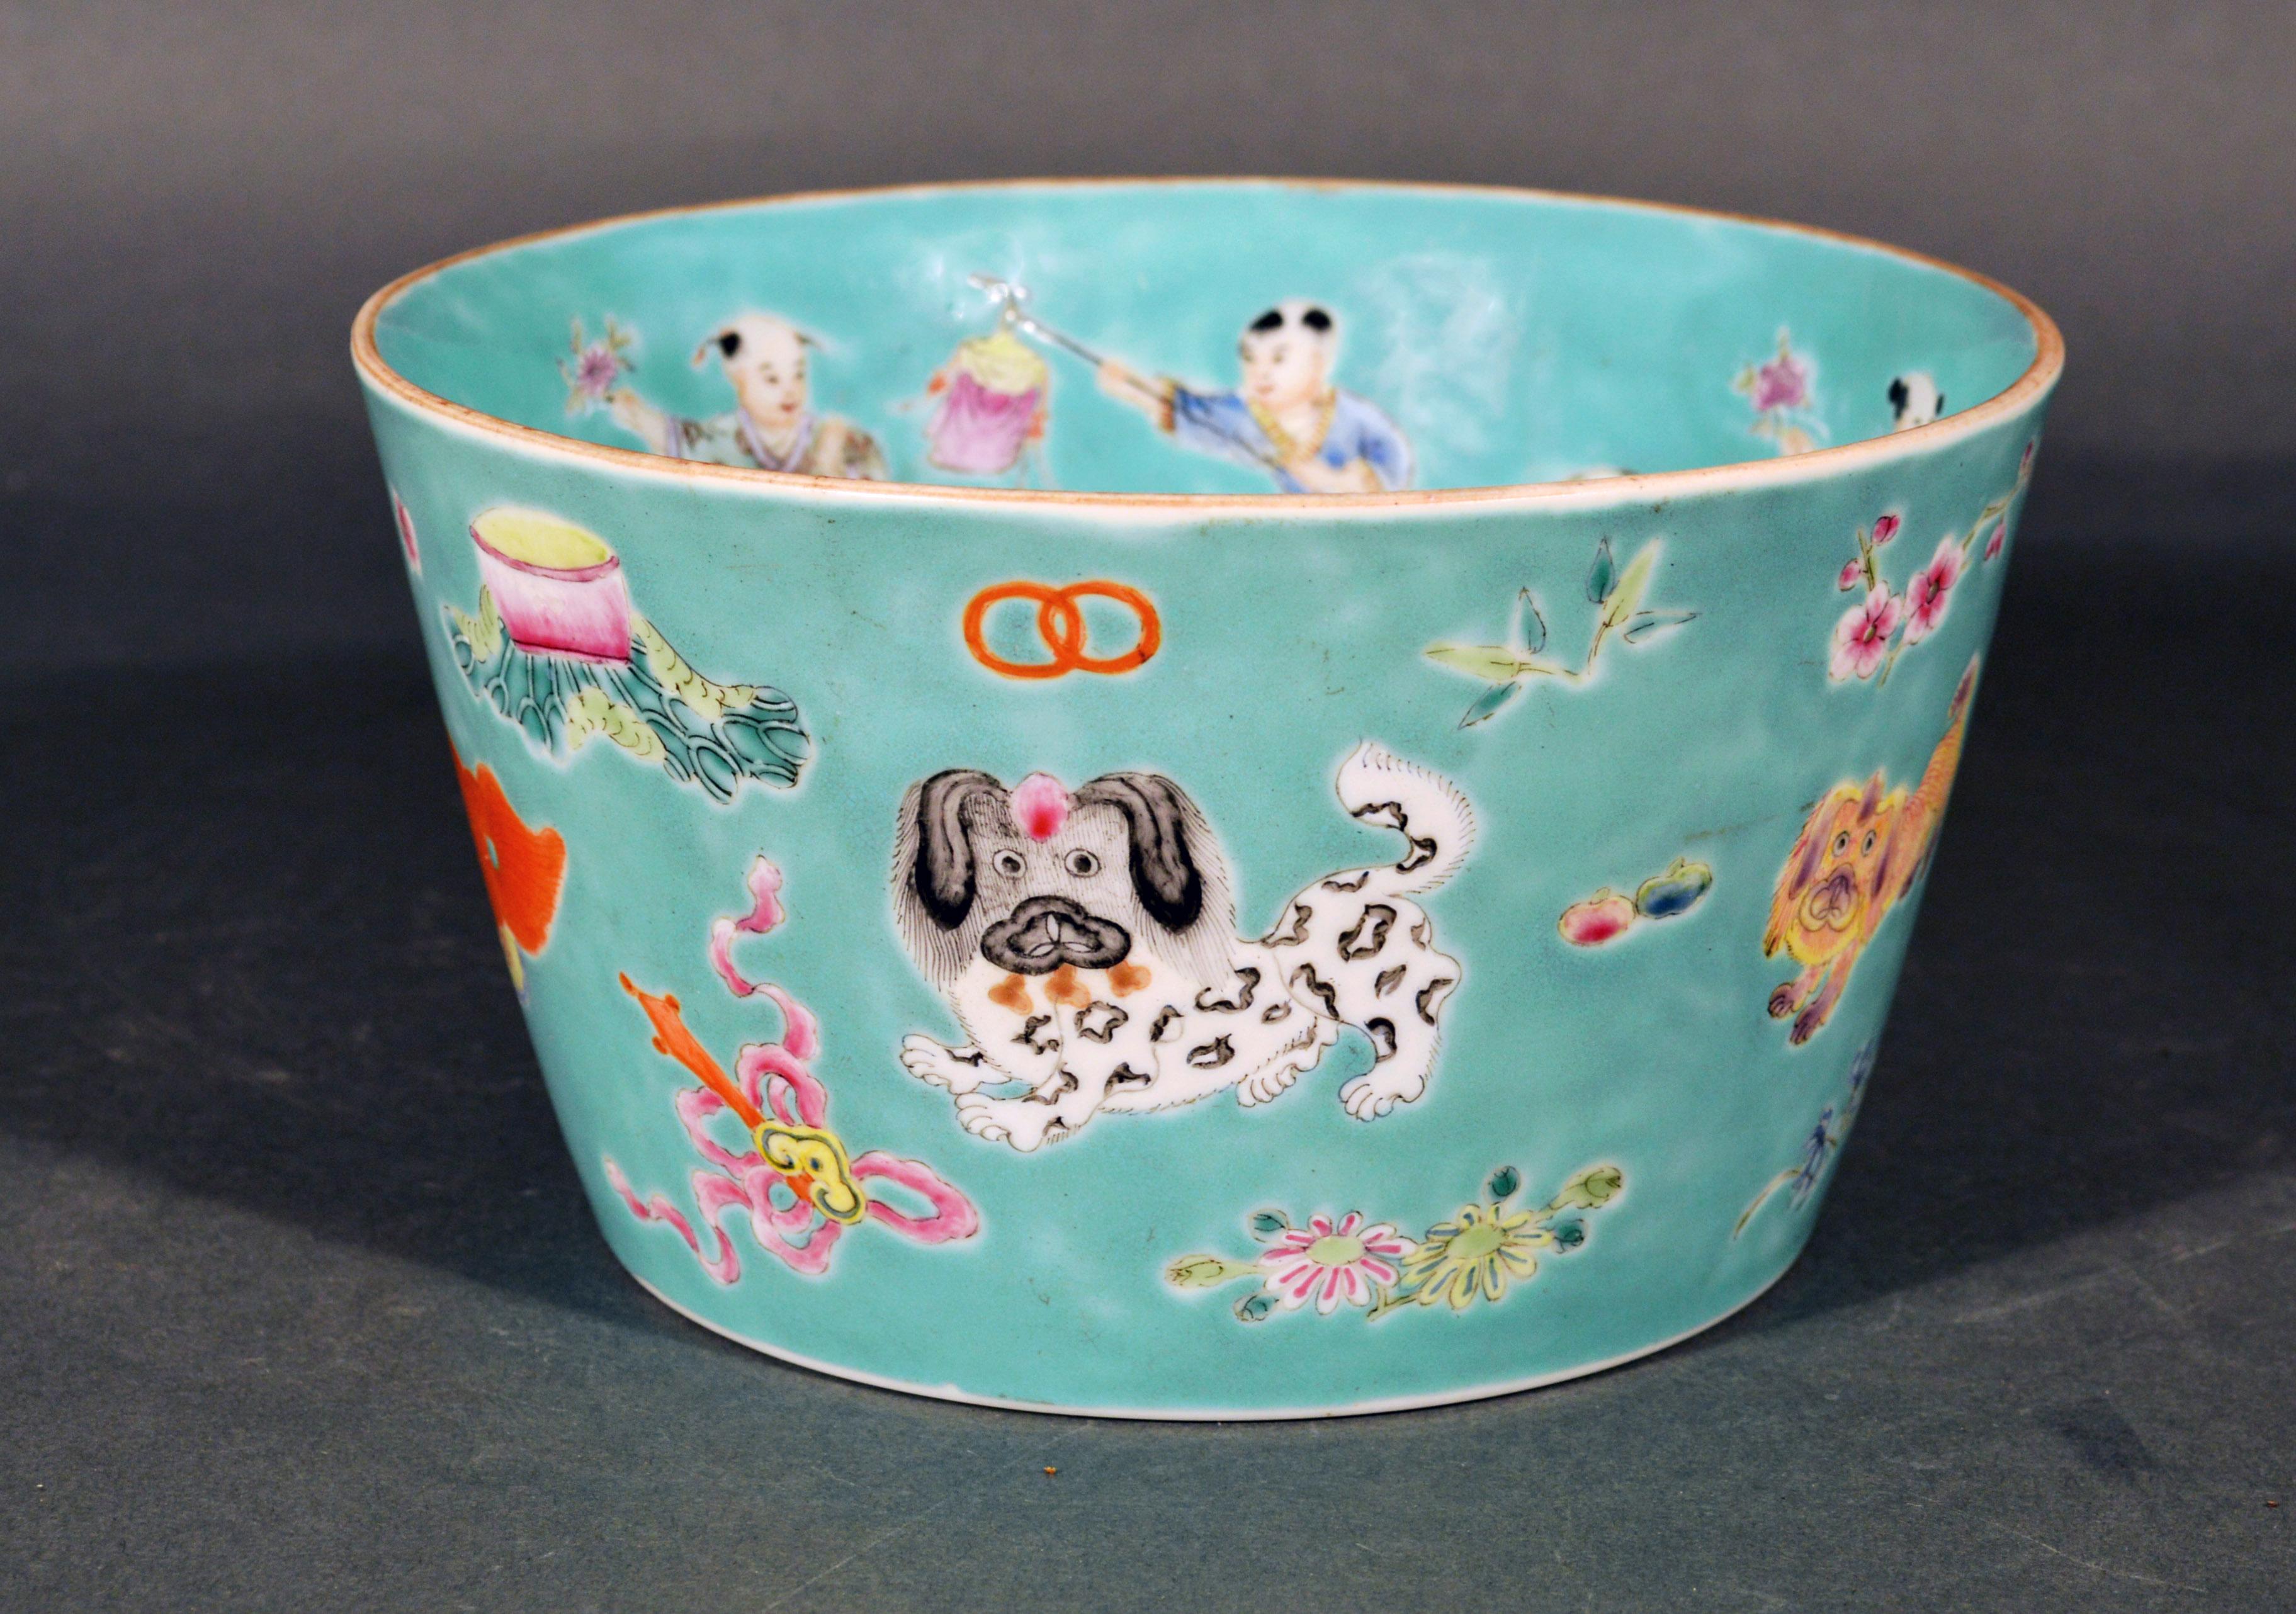 Chinese porcelain turquoise jardinière of bowl with Chinese Boys & Pekingese Dog
Mid-19th century
(Ref: NY9418B-Nrrr)

The circular straight-sided aqua-colored bowl or jardinière with a slightly flaring side is painted with Chinese Dogs on the